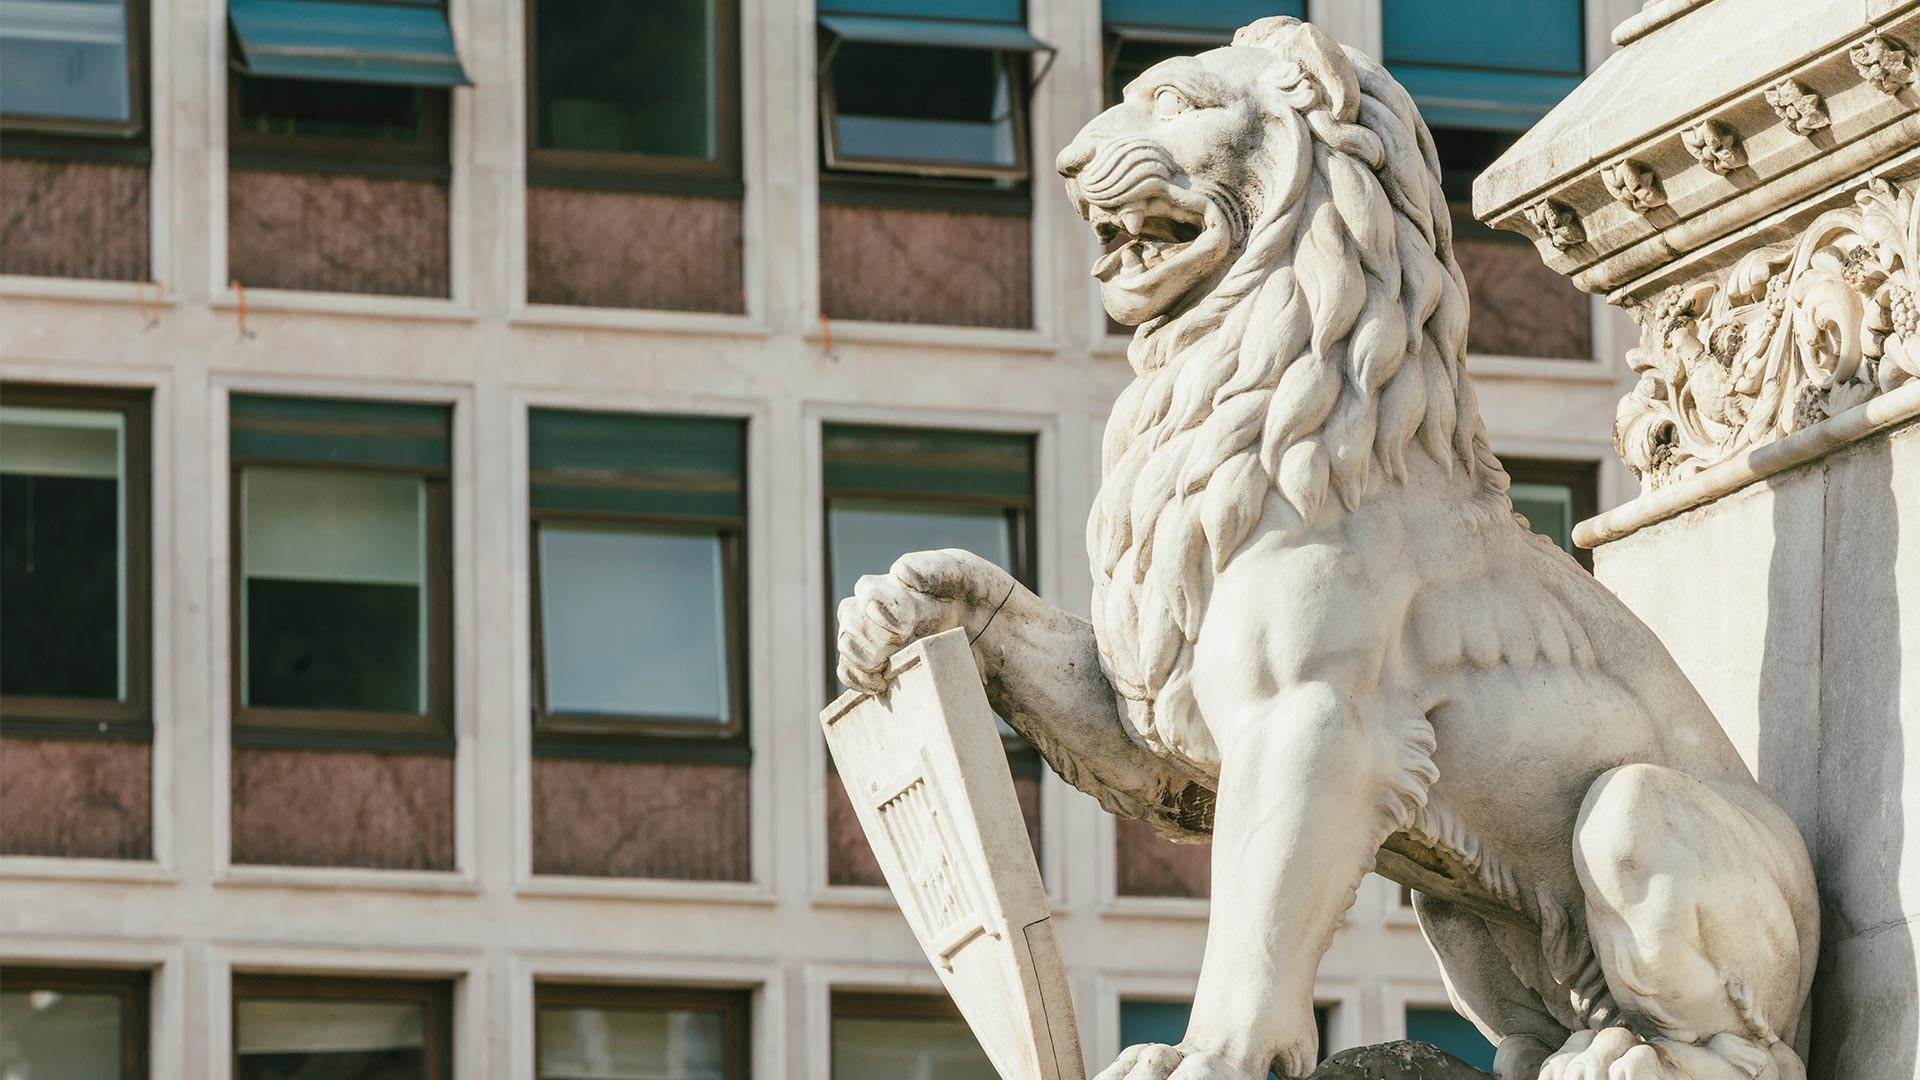 A stone sculpture of a lion holding a shield under its paw stands next to a building.